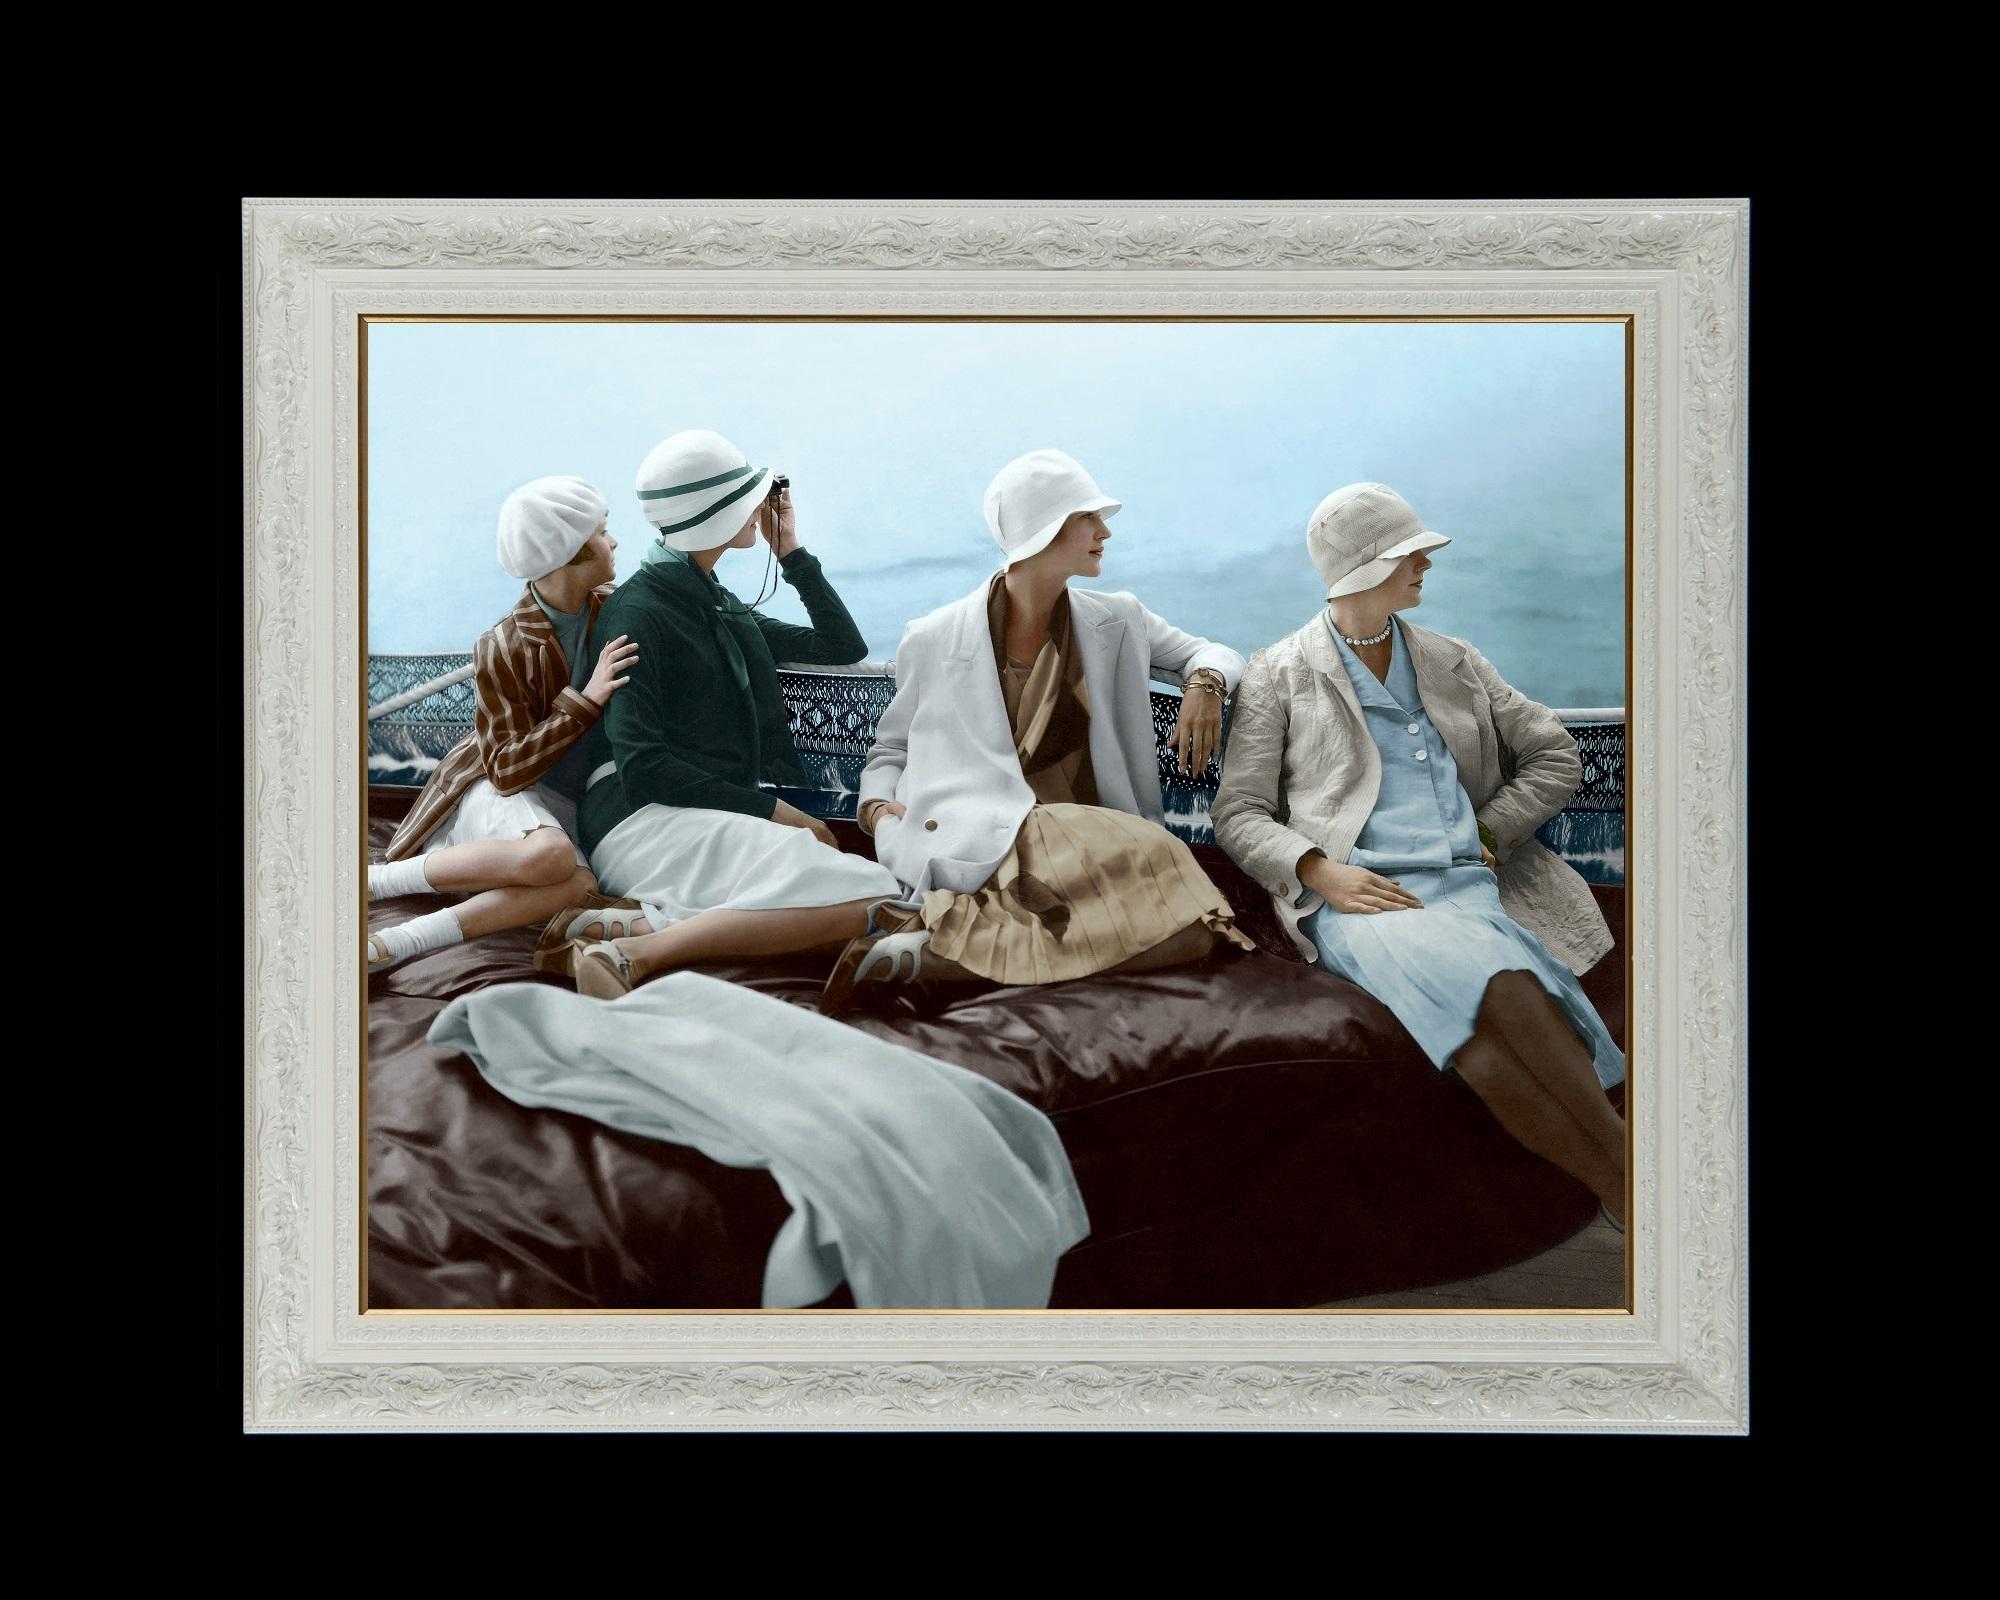 This large Hollywood Regency vintage photograph is a faithful yet nuanced reproduction of 